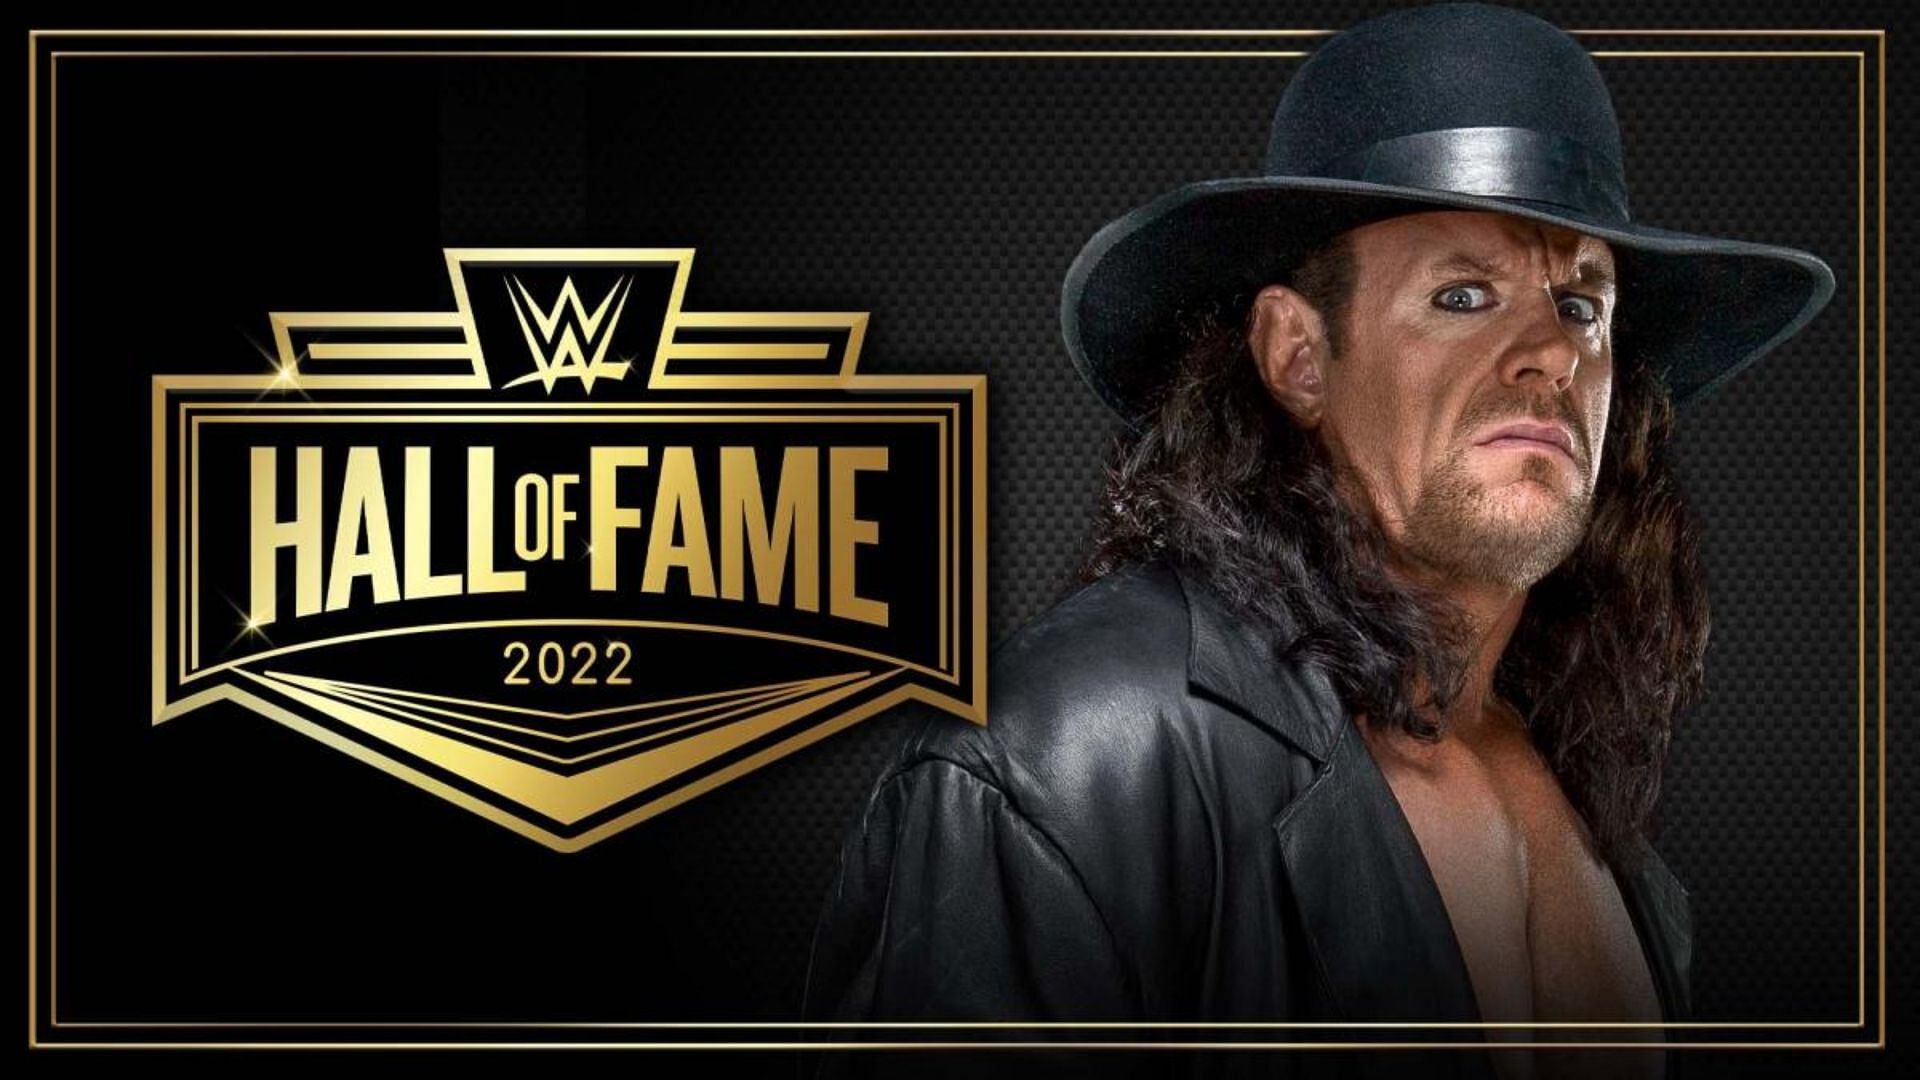 The Undertaker said no to WWE&#039;s hall of fame offer a few years prior.